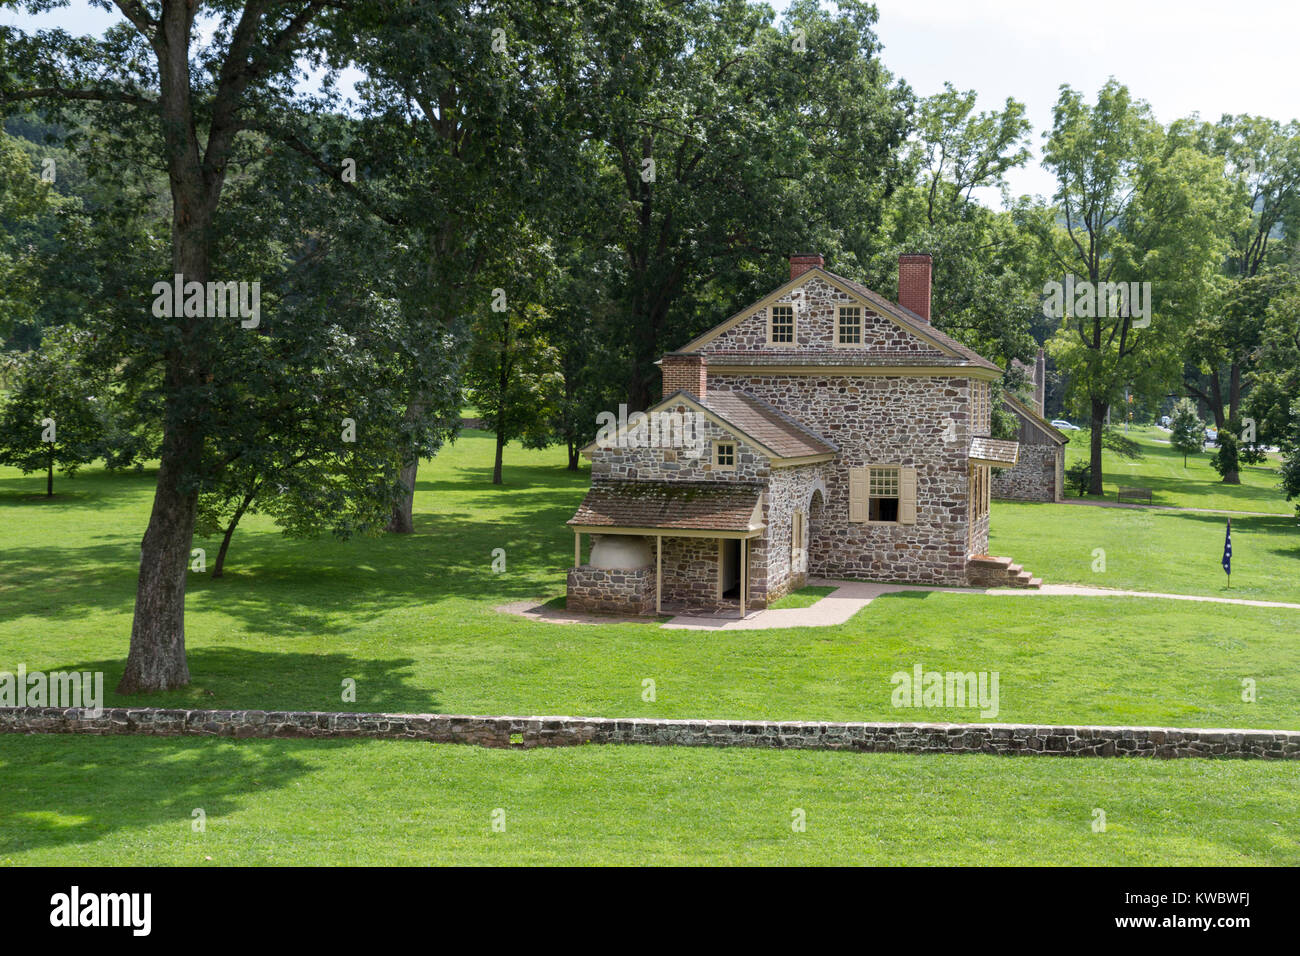 General Washington's Headquarters (Isaac Potts Haus), Valley Forge National Historical Park, Valley Forge, Pennsylvania, USA. Stockfoto